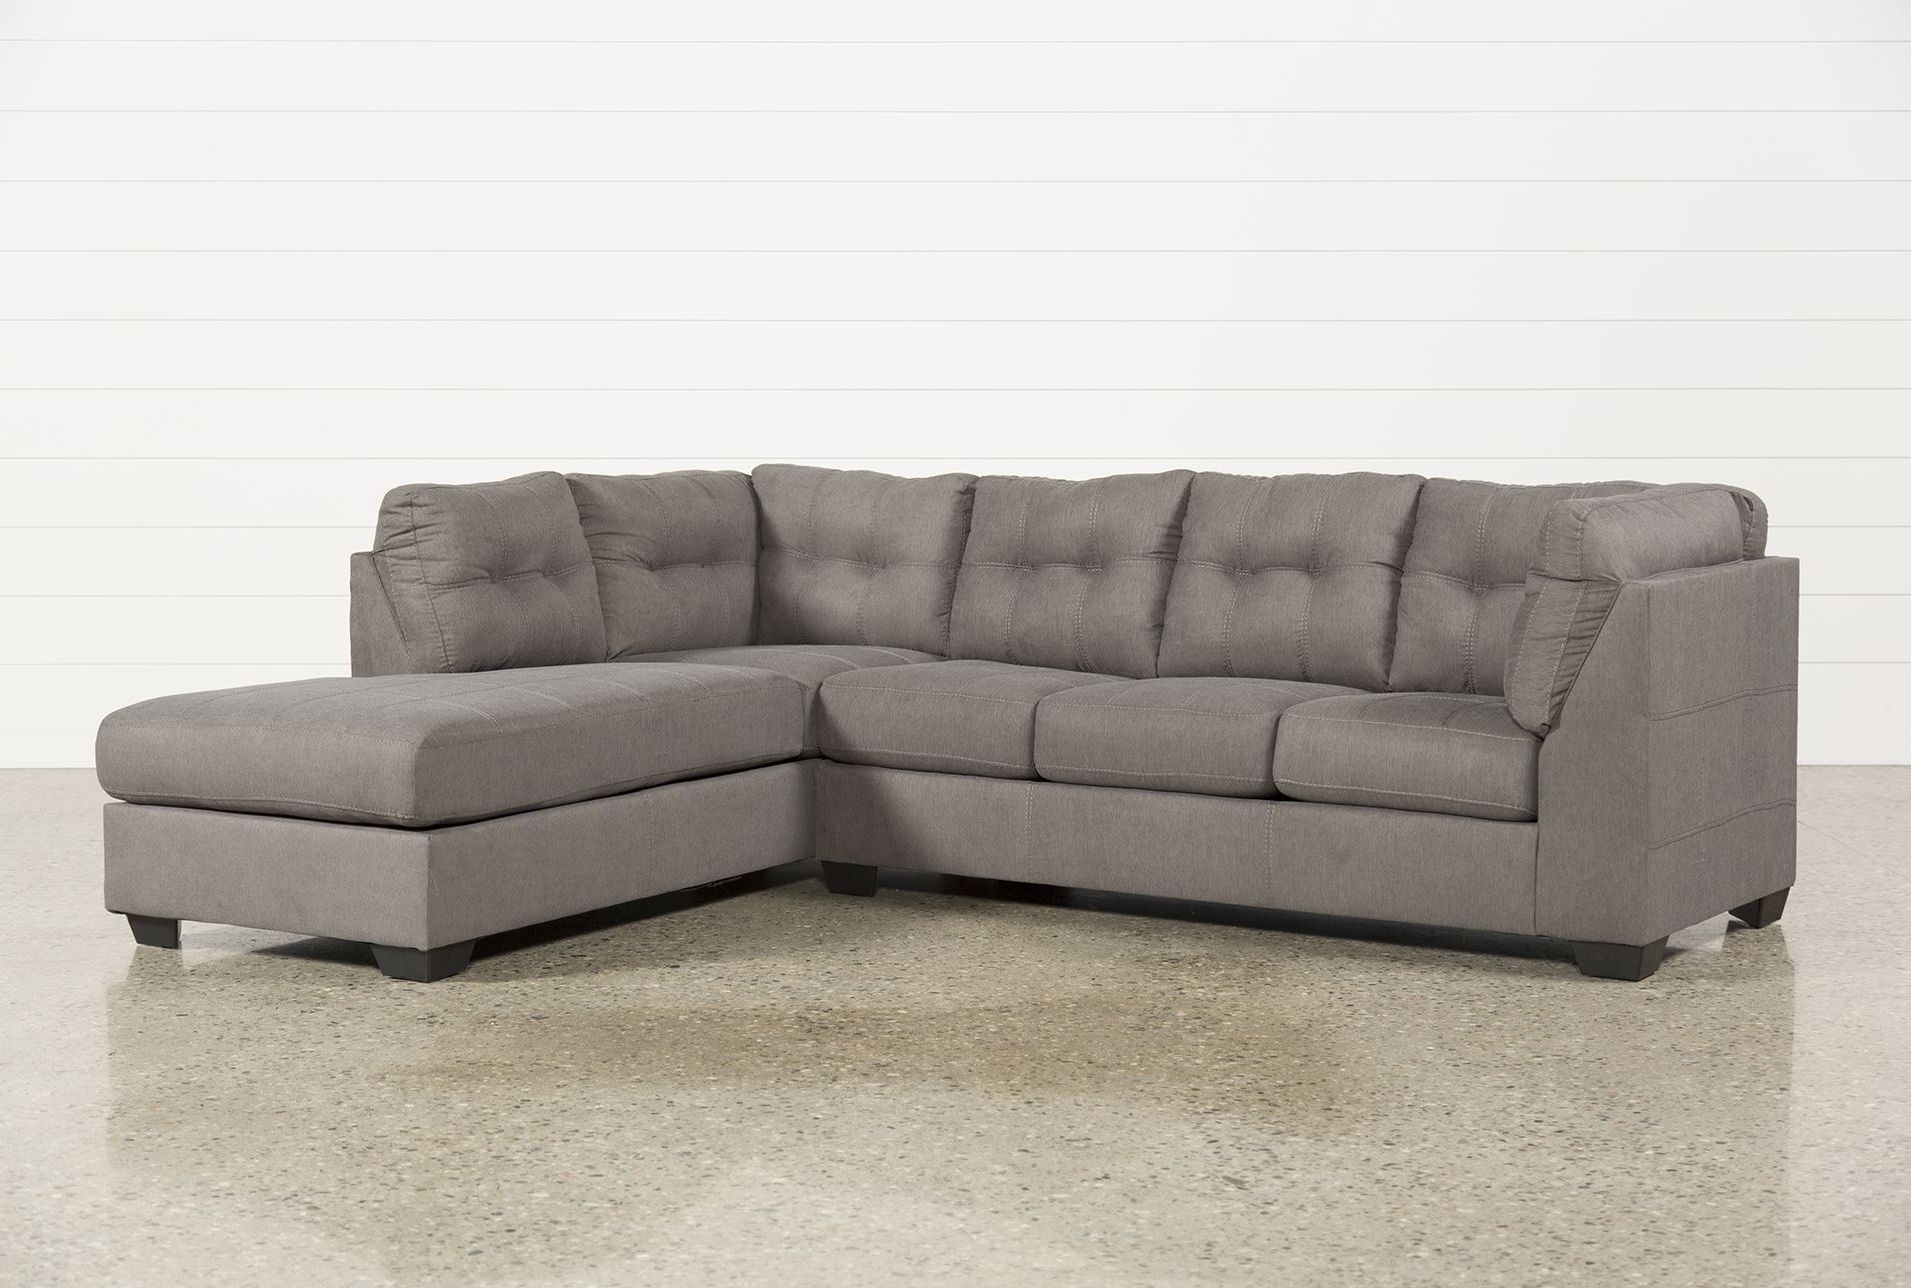 Popular Sectional Sofa With 2 Chaises 26 For Sectional Sofas Pertaining To Well Known Sectional Chaises (View 5 of 15)